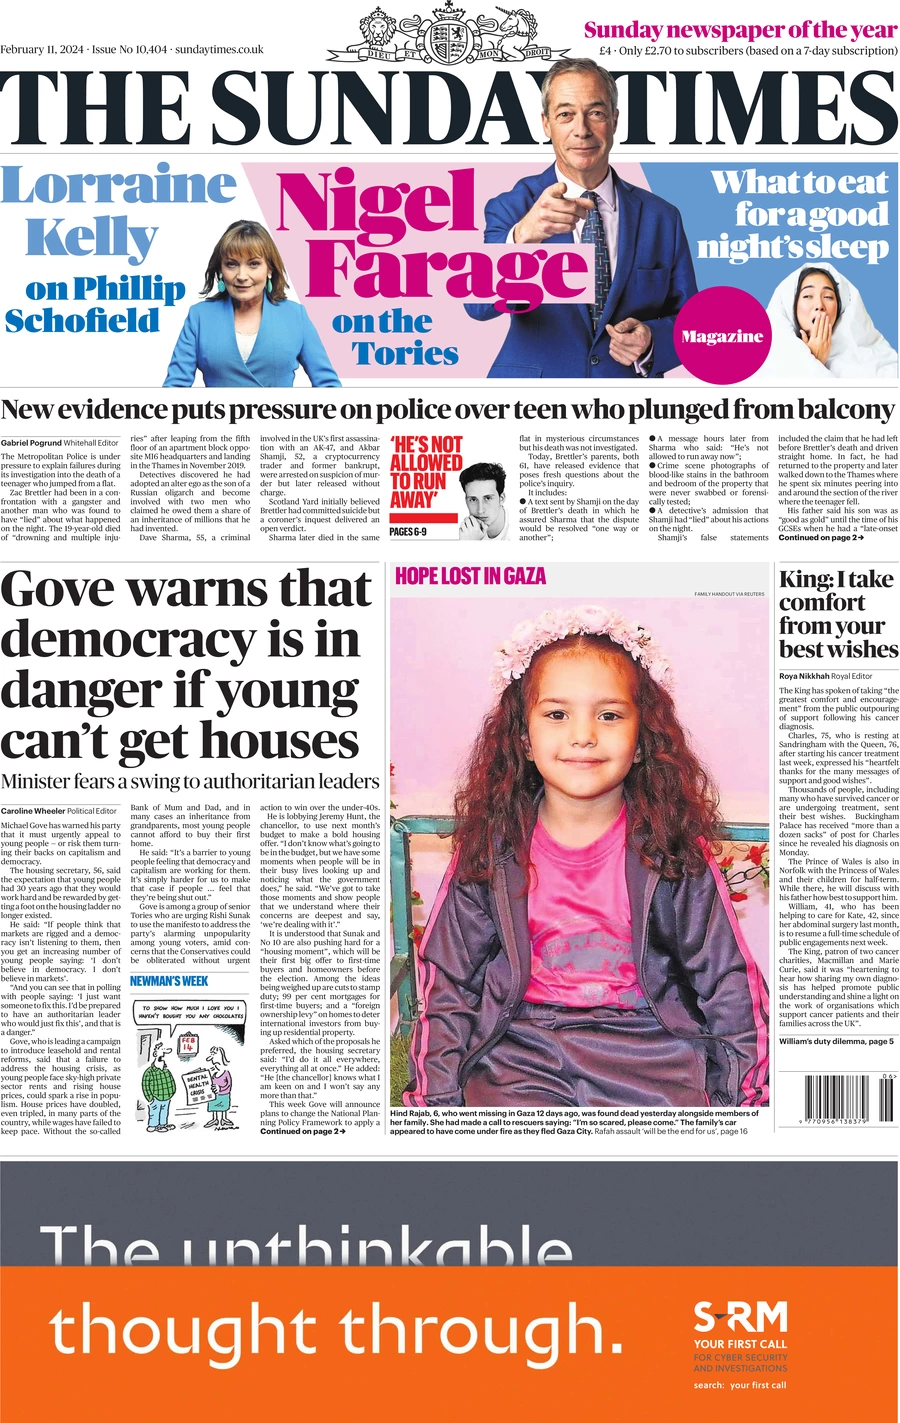 The Sunday Times – Gove warns that democracy is in danger if young can’t get houses